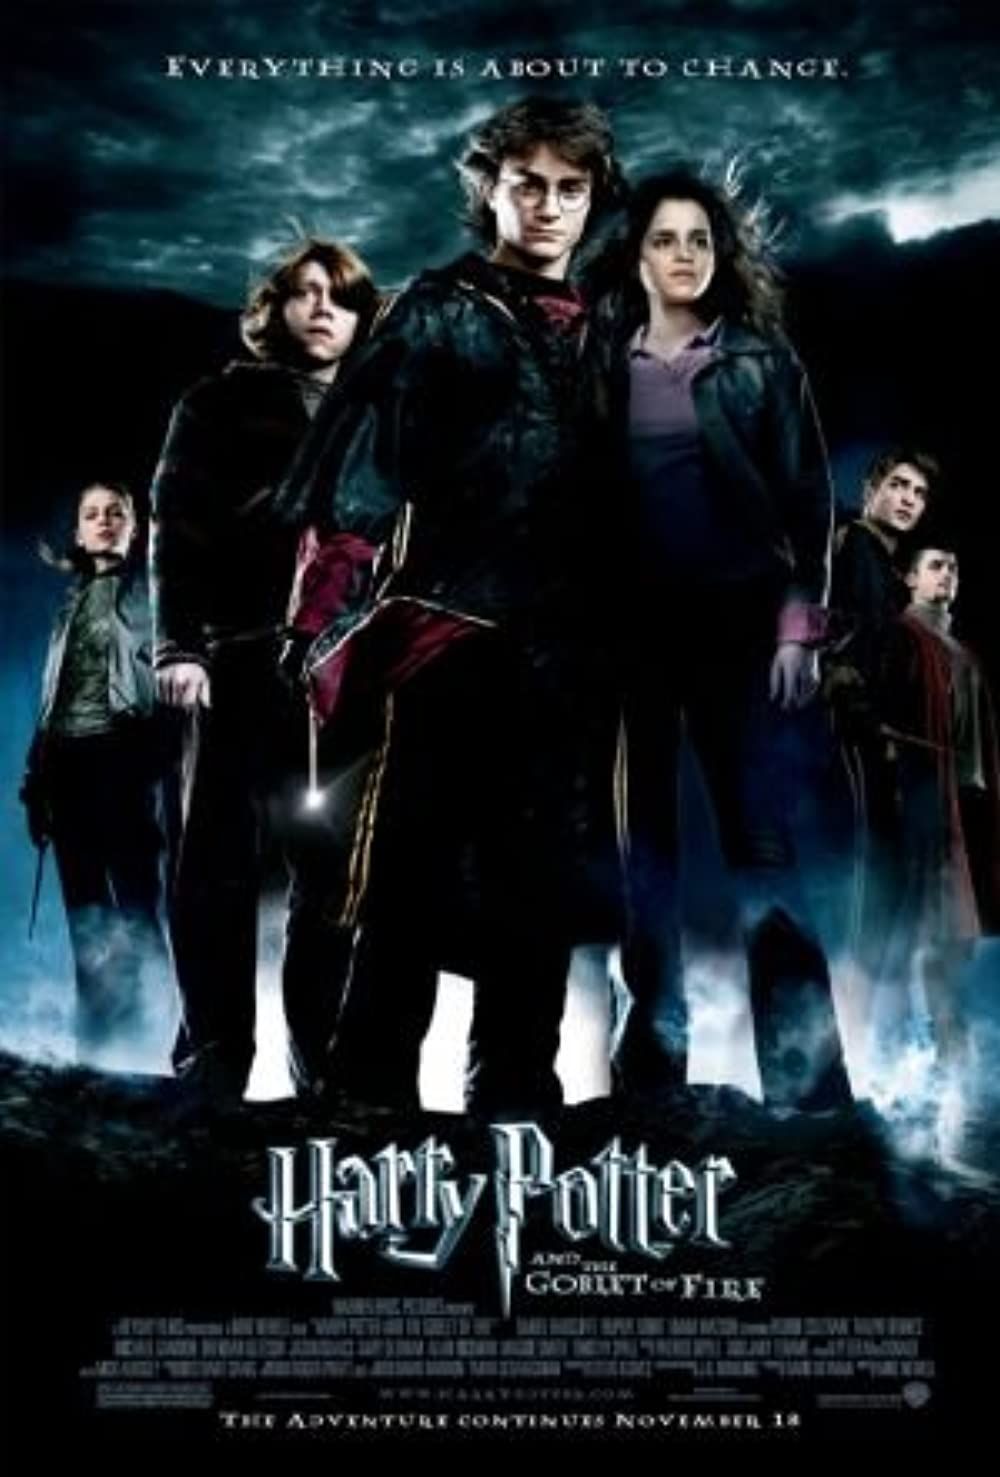 Harry Potter Movies in Order: How to Watch Chronologically or By